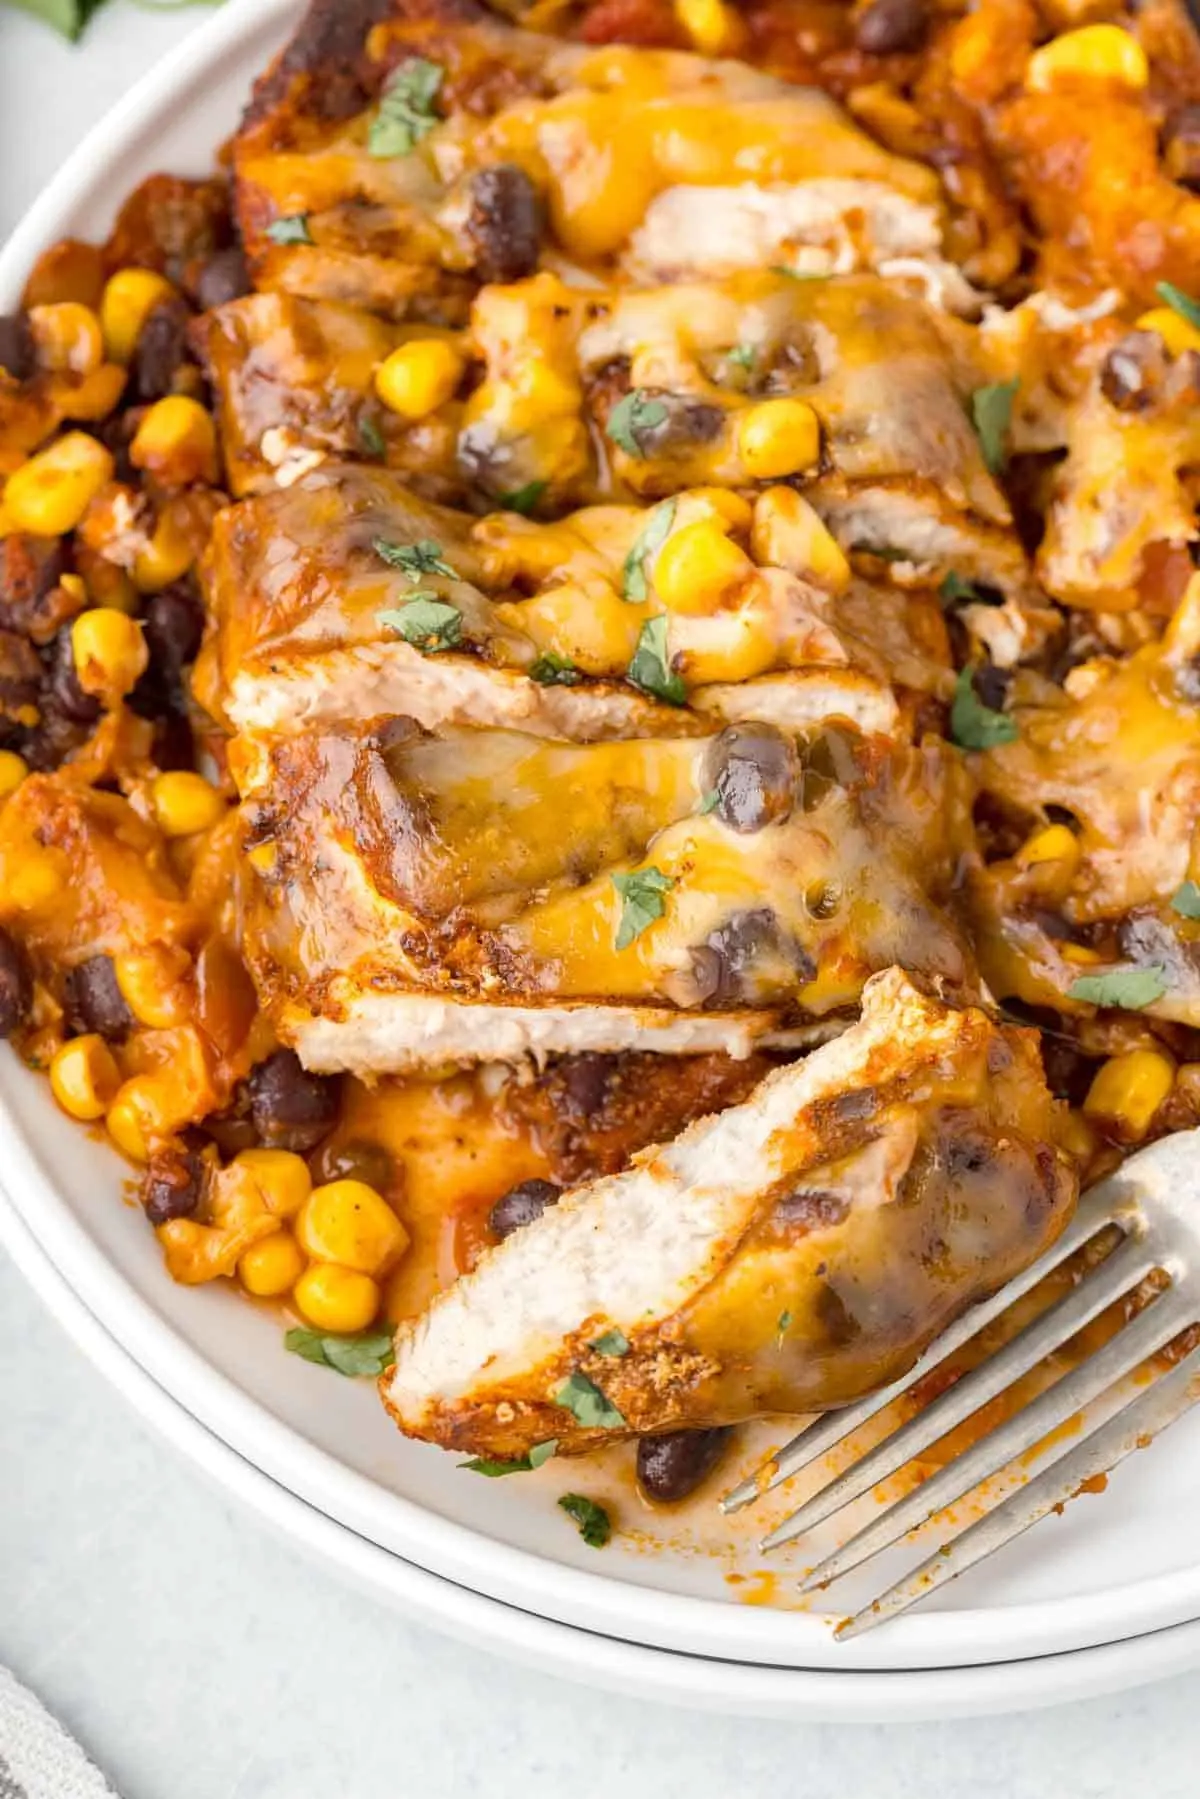 Santa Fe Chicken is a delicious skillet chicken breast dish loaded with spices, salsa, black beans, corn and Colby Jack cheese.